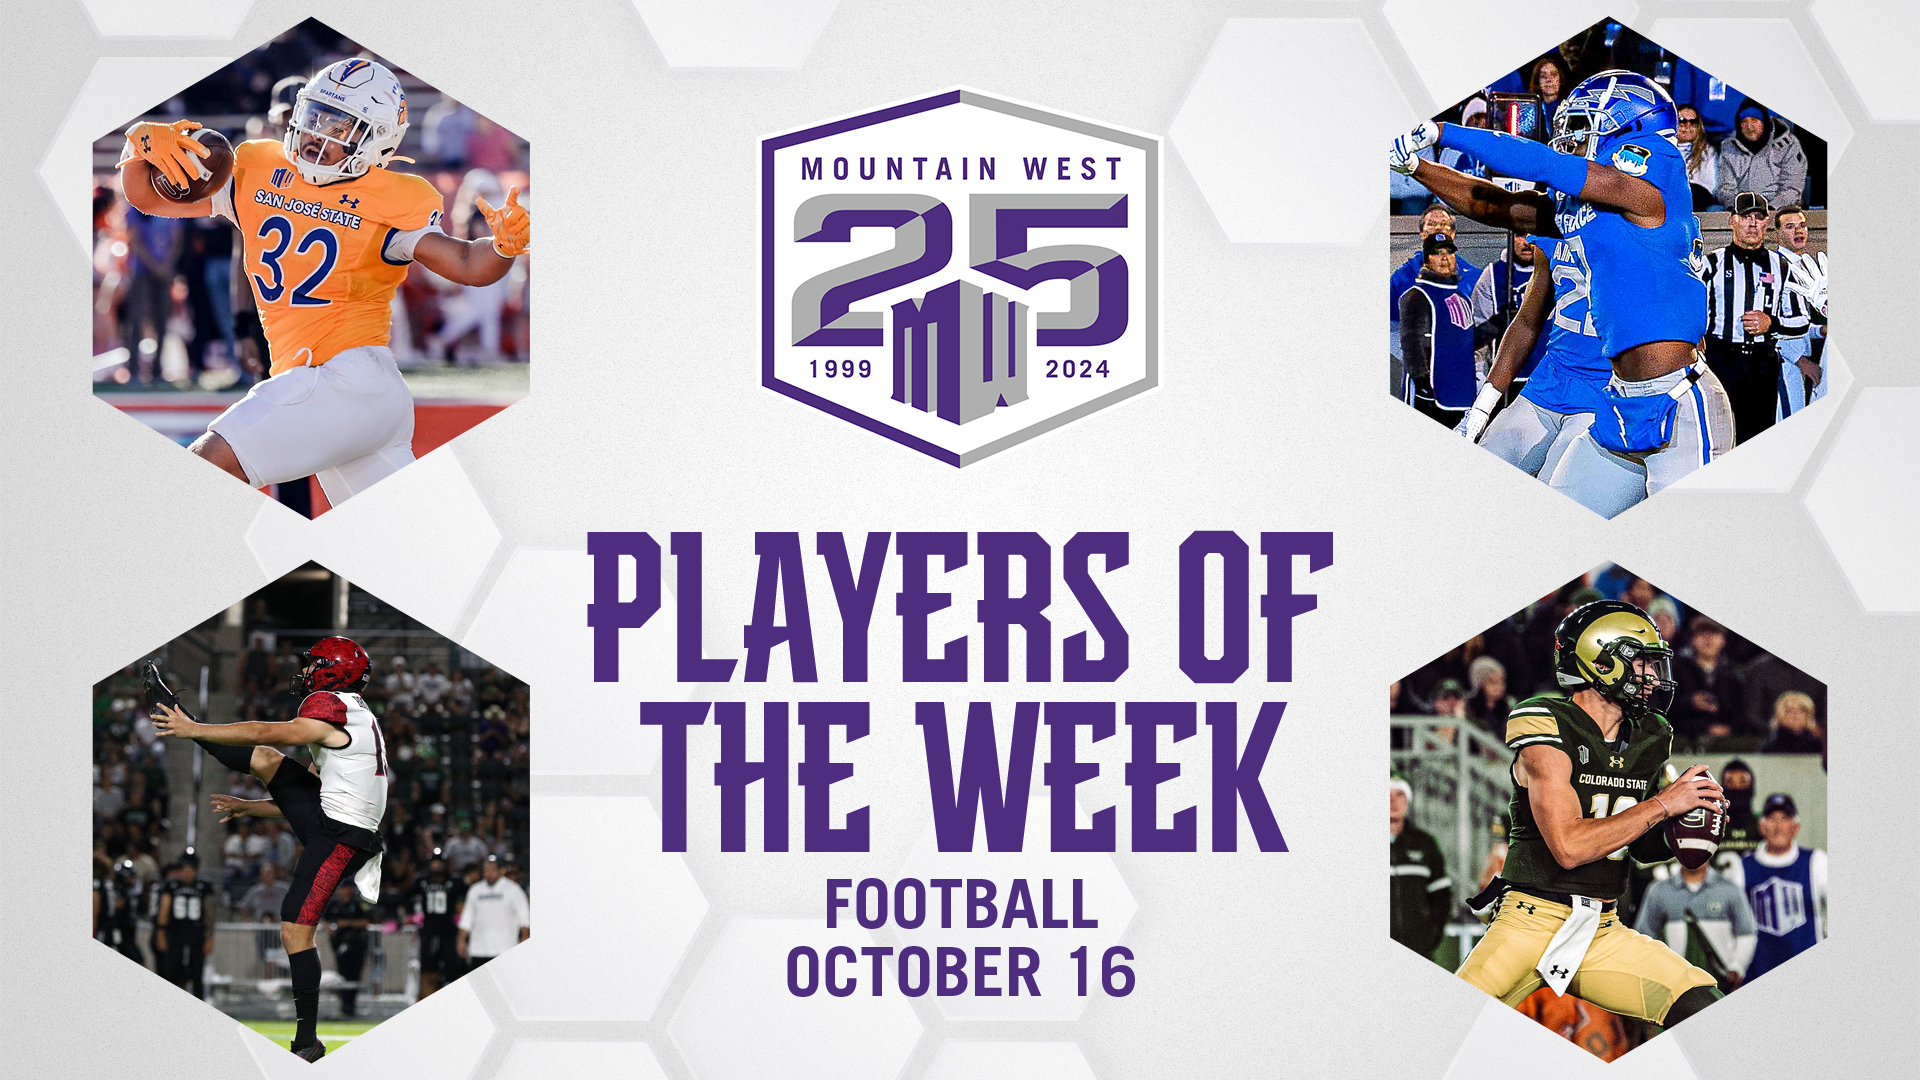 MW Football Players of the Week - Oct. 16